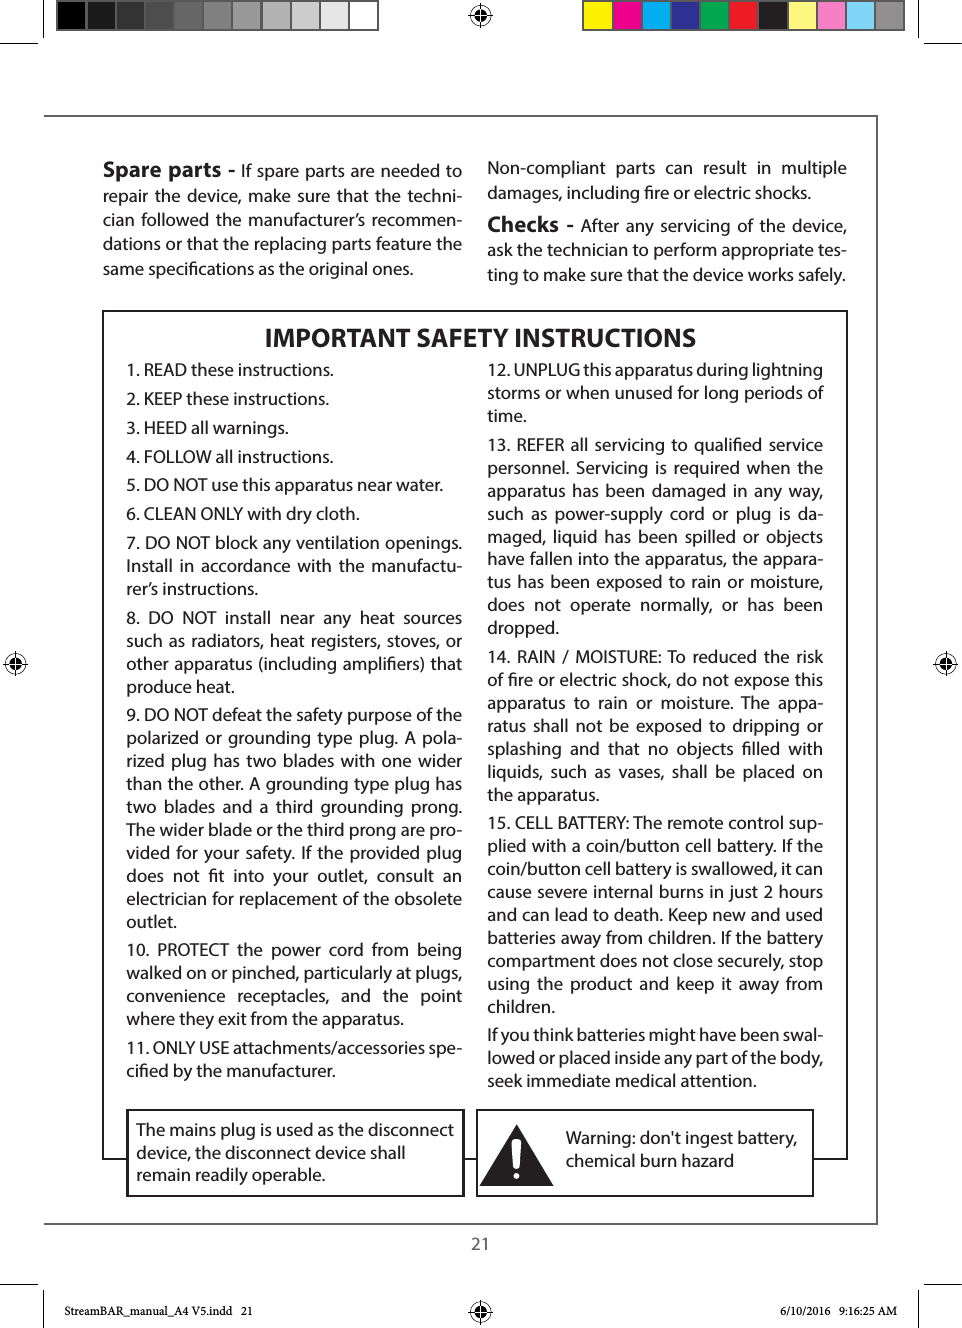  21IMPORTANT SAFETY INSTRUCTIONSSpare parts - If spare parts are needed to repair the device, make sure that the techni-cian followed the manufacturer’s recommen-dations or that the replacing parts feature the same specications as the original ones. Non-compliant parts can result in multiple damages, including re or electric shocks.Checks - After any servicing of the device, ask the technician to perform appropriate tes-ting to make sure that the device works safely.1. READ these instructions.2. KEEP these instructions.3. HEED all warnings.4. FOLLOW all instructions.5. DO NOT use this apparatus near water.6. CLEAN ONLY with dry cloth.7. DO NOT block any ventilation openings. Install in accordance with the manufactu-rer’s instructions.8. DO NOT install near any heat sources such as radiators, heat registers, stoves, or other apparatus (including ampliers) that produce heat.9. DO NOT defeat the safety purpose of the polarized or grounding type plug. A pola-rized plug has two blades with one wider than the other. A grounding type plug has two blades and a third grounding prong. The wider blade or the third prong are pro-vided for your safety. If the provided plug does not t into your outlet, consult an electrician for replacement of the obsolete outlet.10. PROTECT the power cord from being walked on or pinched, particularly at plugs, convenience receptacles, and the point where they exit from the apparatus.11. ONLY USE attachments/accessories spe-cied by the manufacturer.12. UNPLUG this apparatus during lightning storms or when unused for long periods of time.13. REFER all servicing to qualied service personnel. Servicing is required when the apparatus has been damaged in any way, such as power-supply cord or plug is da-maged, liquid has been spilled or objects have fallen into the apparatus, the appara-tus has been exposed to rain or moisture, does not operate normally, or has been dropped.14. RAIN / MOISTURE: To reduced the risk of re or electric shock, do not expose this apparatus to rain or moisture. The appa-ratus shall not be exposed to dripping or splashing and that no objects lled with liquids, such as vases, shall be placed on the apparatus.15. CELL BATTERY: The remote control sup-plied with a coin/button cell battery. If the coin/button cell battery is swallowed, it can cause severe internal burns in just 2 hours and can lead to death. Keep new and used batteries away from children. If the battery compartment does not close securely, stop using the product and keep it away from children.If you think batteries might have been swal-lowed or placed inside any part of the body, seek immediate medical attention.Warning: don&apos;t ingest battery, chemical burn hazardThe mains plug is used as the disconnect device, the disconnect device shall remain readily operable. StreamBAR_manual_A4 V5.indd   21 6/10/2016   9:16:25 AM